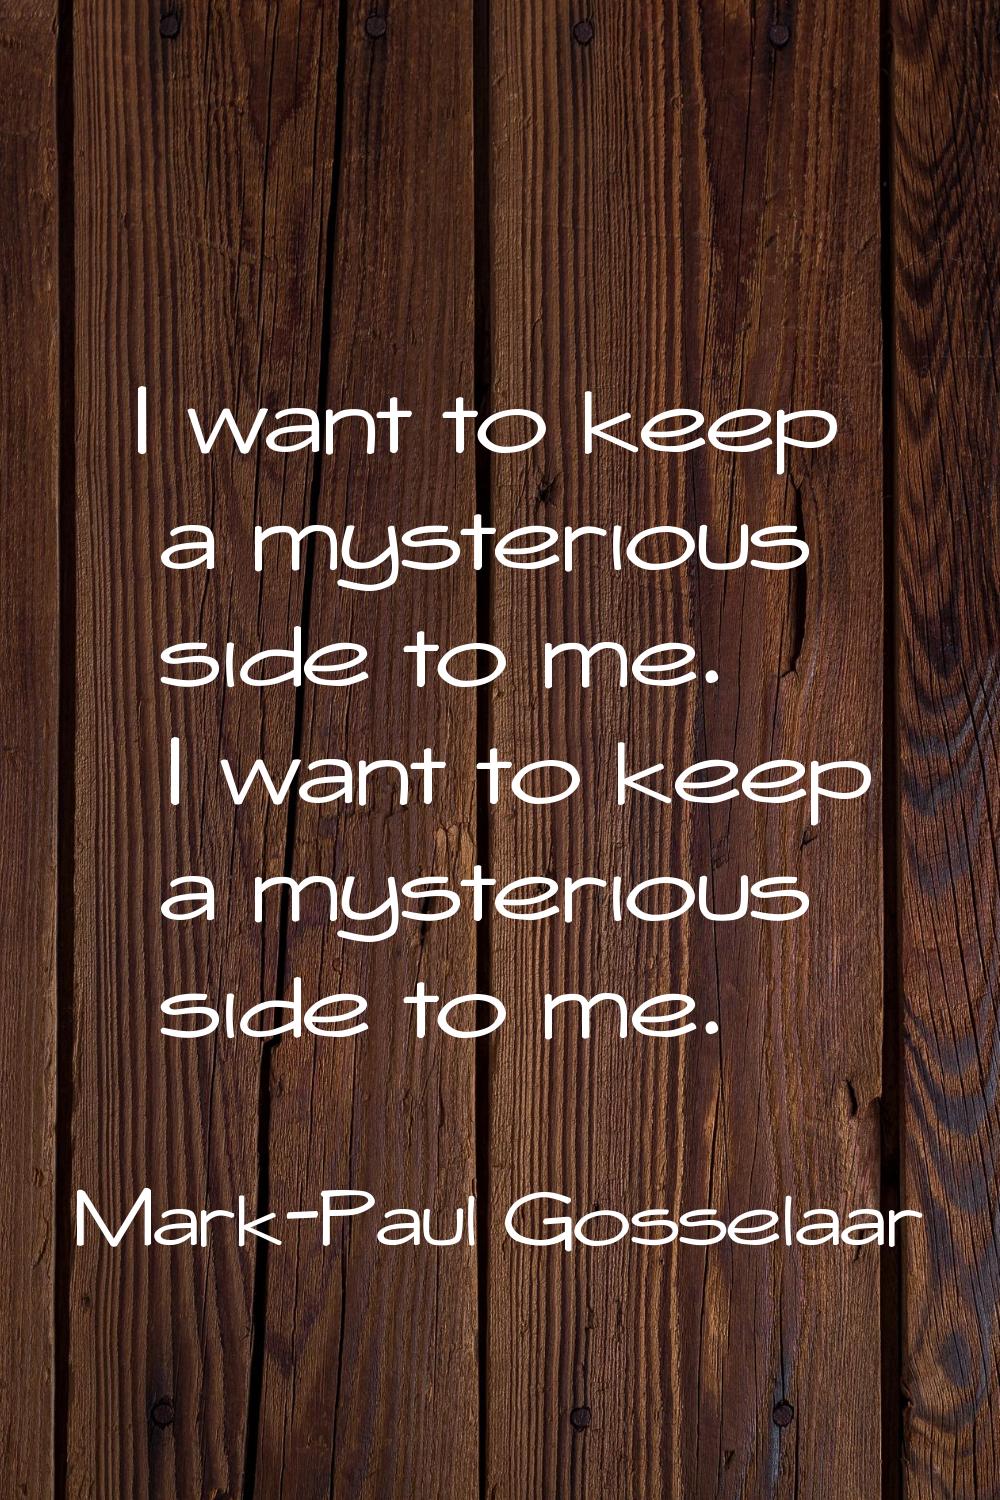 I want to keep a mysterious side to me. I want to keep a mysterious side to me.